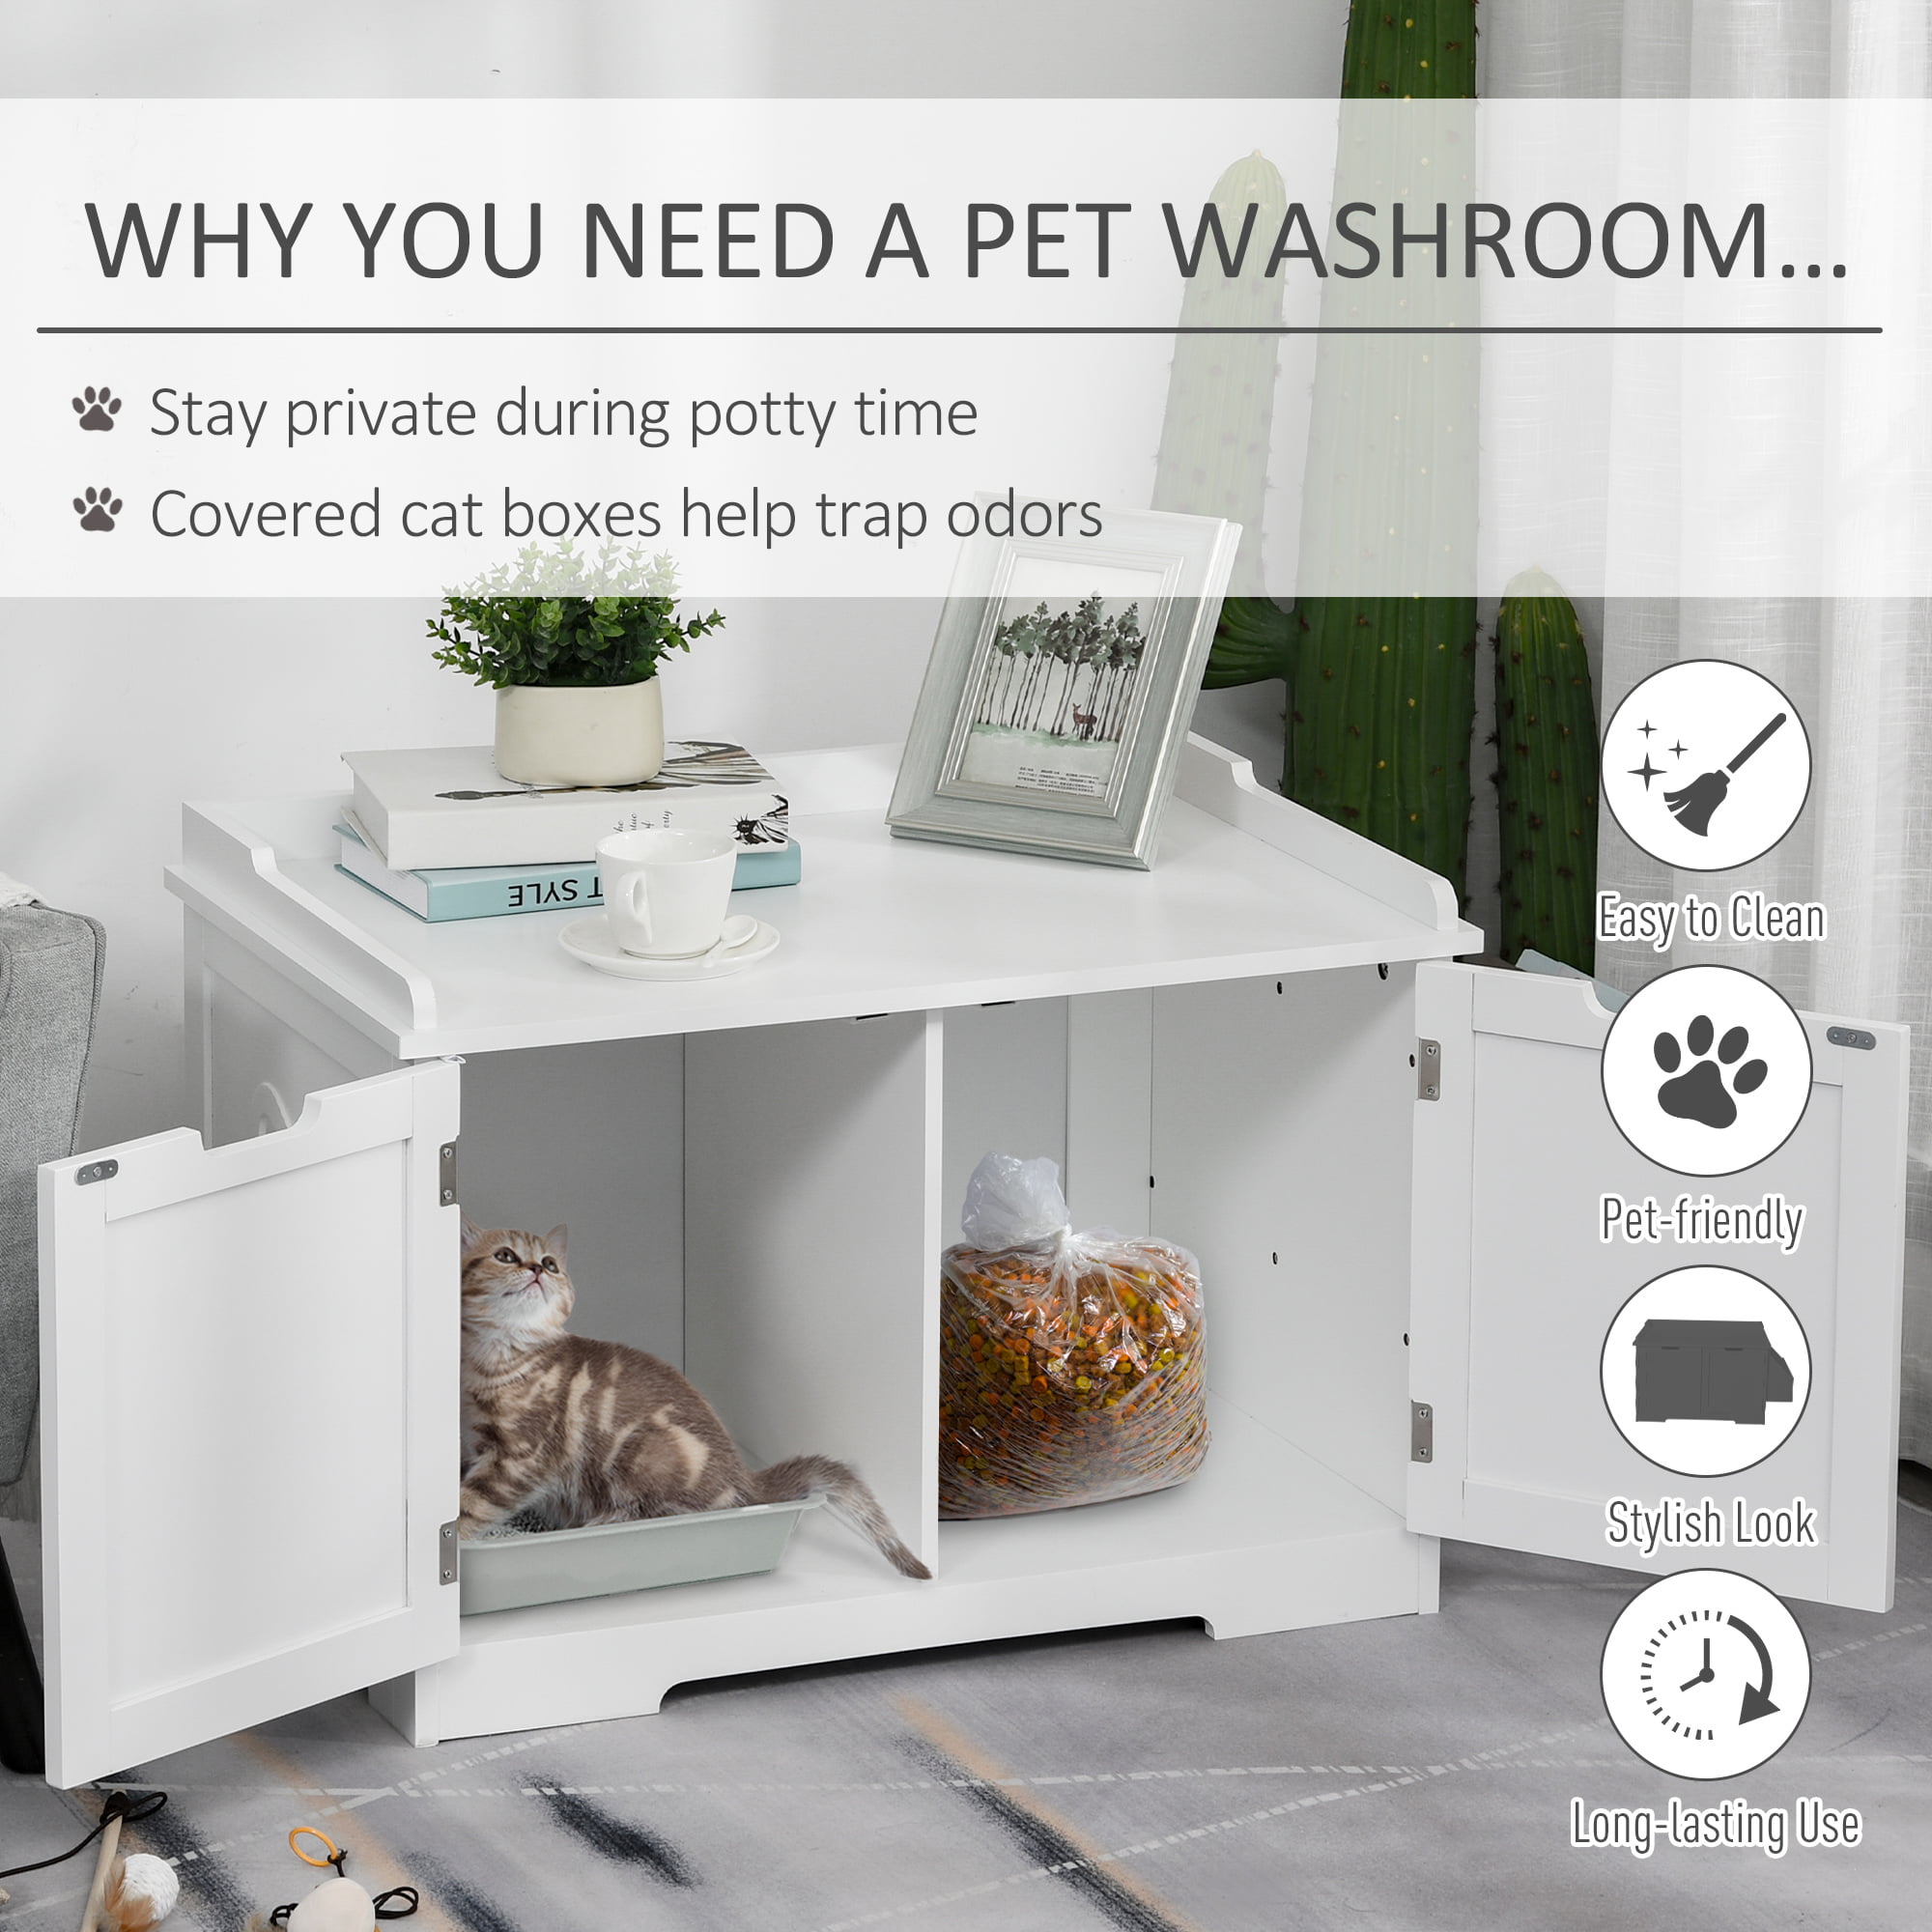 PawHut Wooden Cat Litter Box Enclosure Washroom Pet Decorative Kitten House Nightstand End Table Indoor with 2 Magnetic Door Wide Tabletop White 